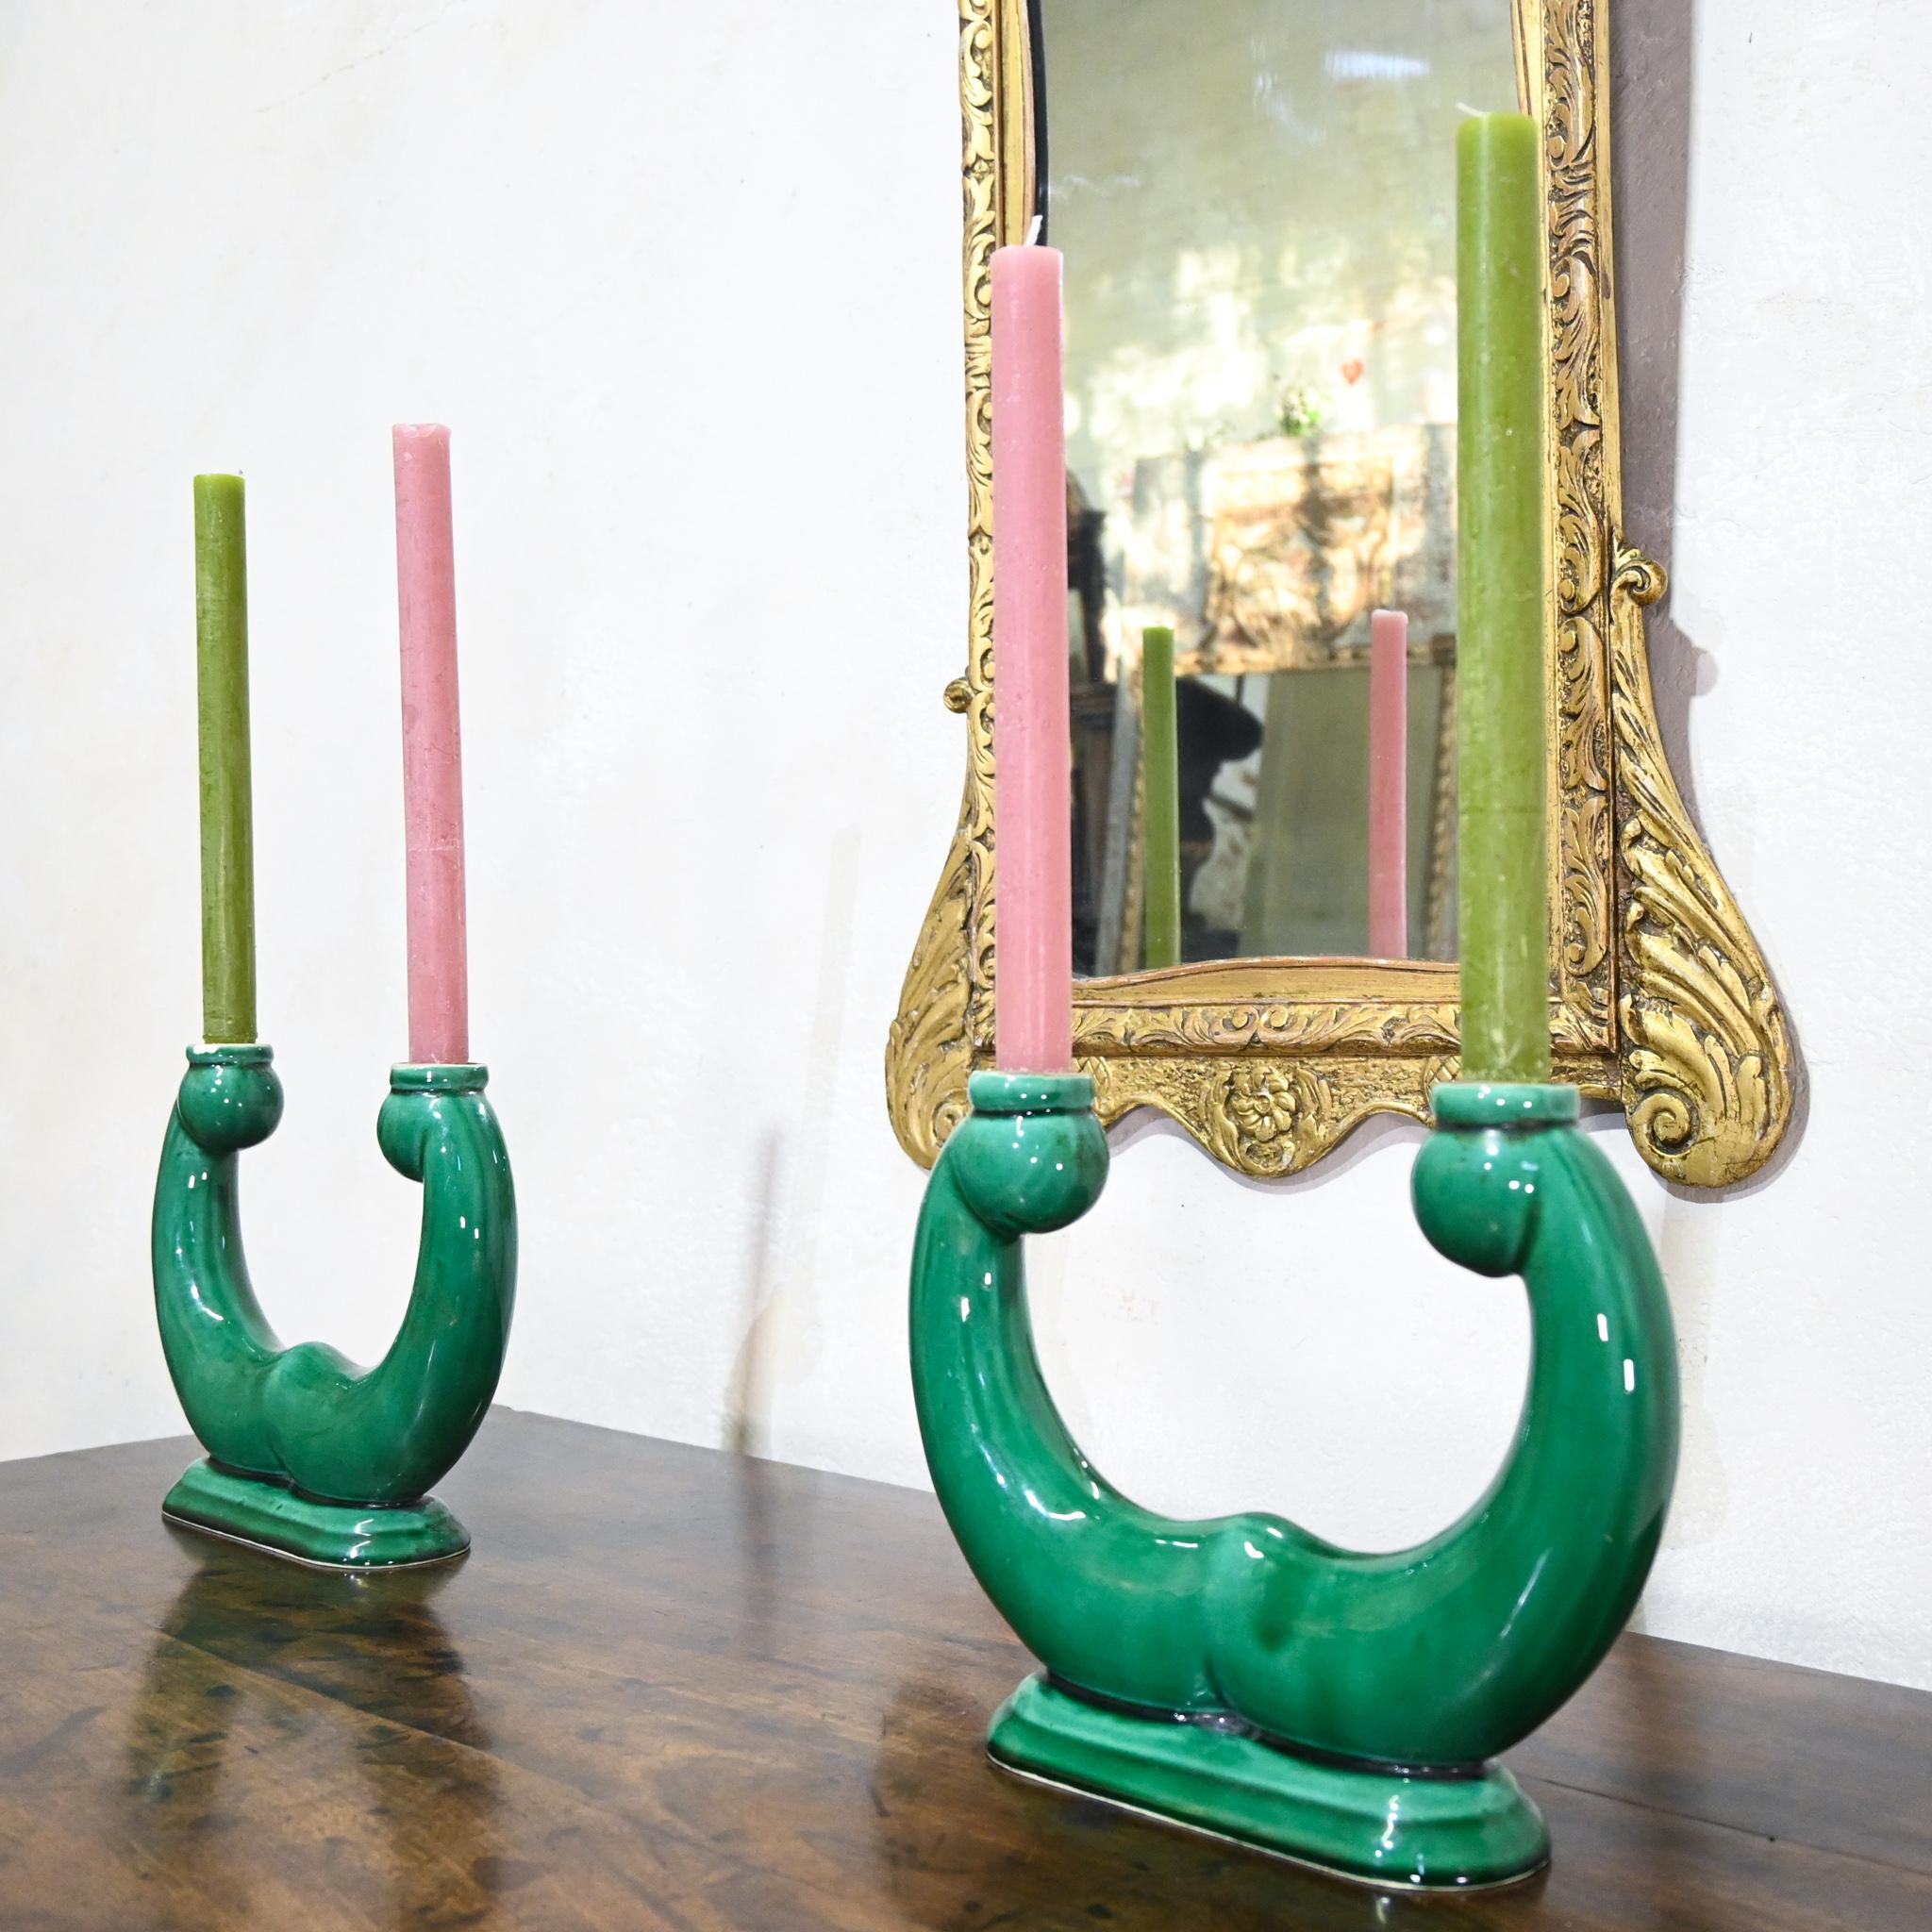 A highly decorative pair of early 20th century French emerald green candlesticks - from Vallauris, France, 1940s. Marked 